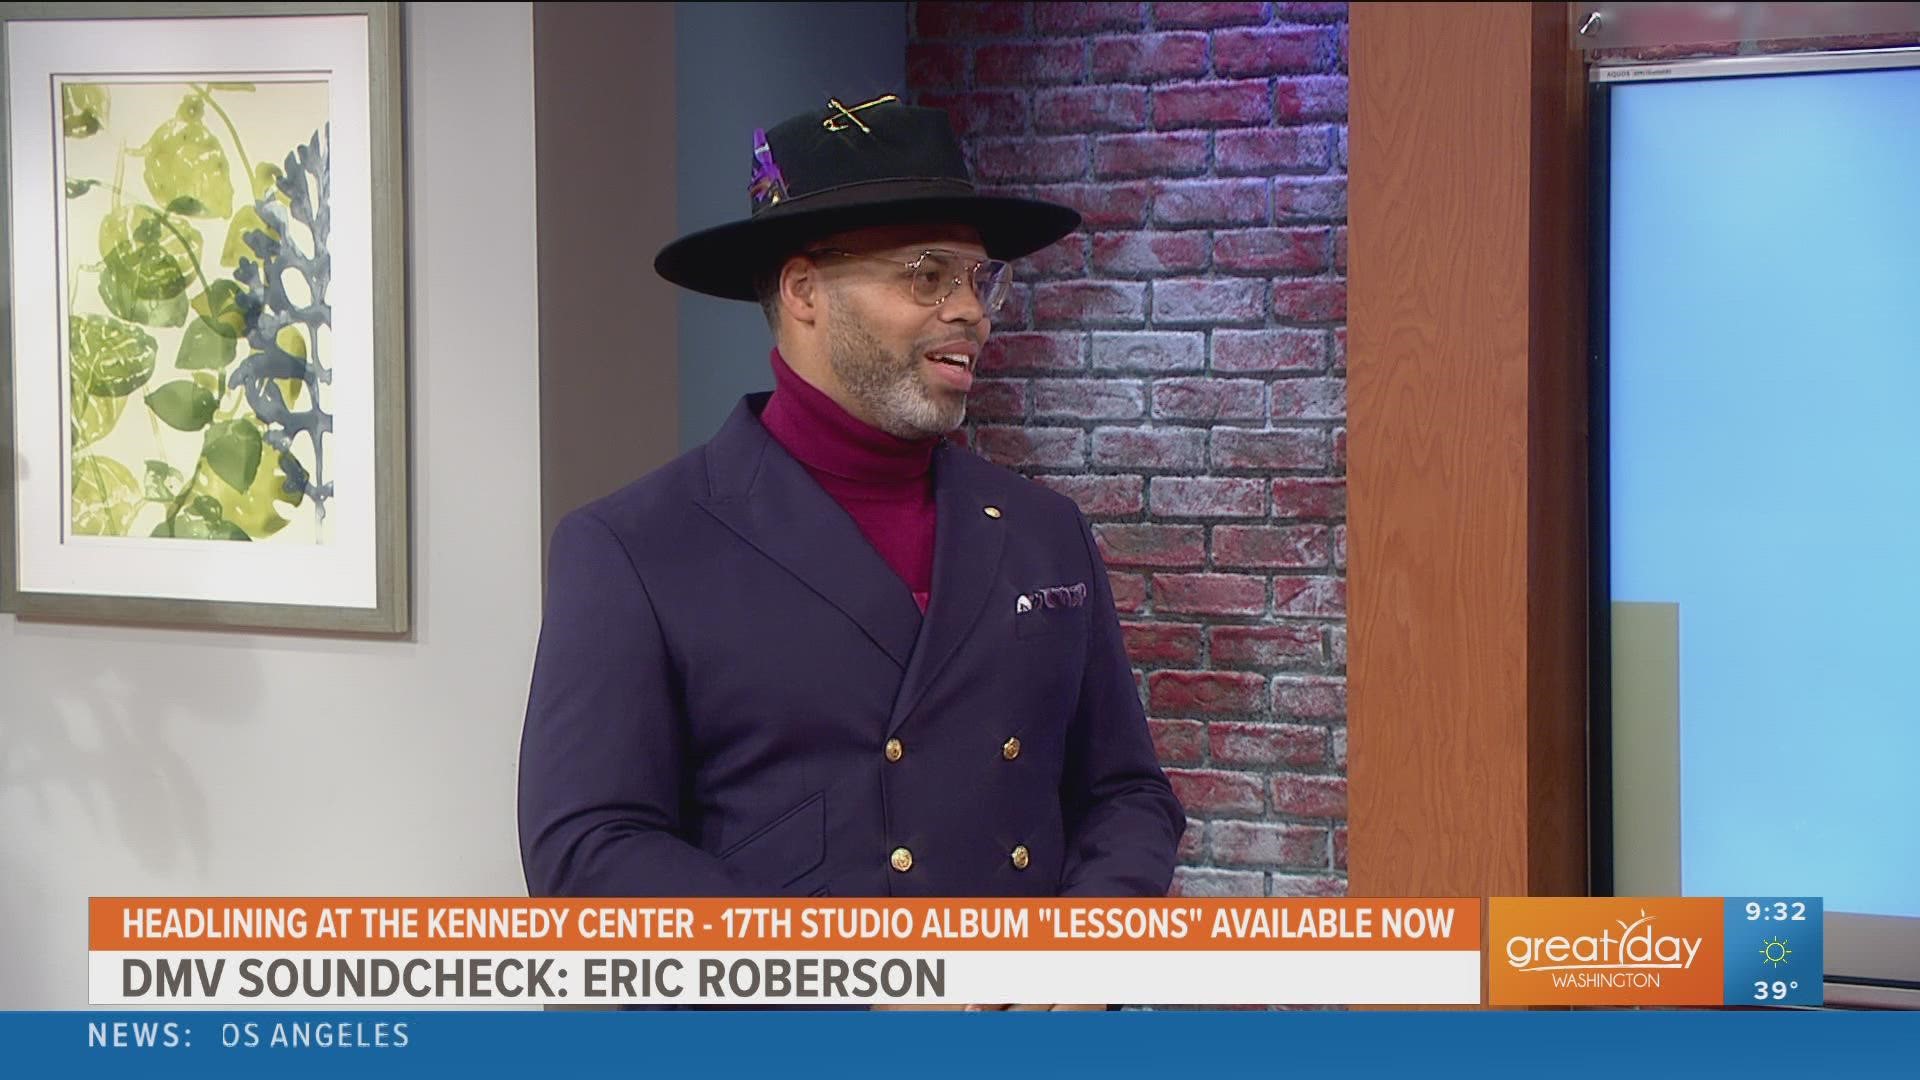 Kristen and Ellen caught up with GRAMMY-nominated singer/songwriter/producer Eric Roberson.  He performed the new single "Start All Over Again".